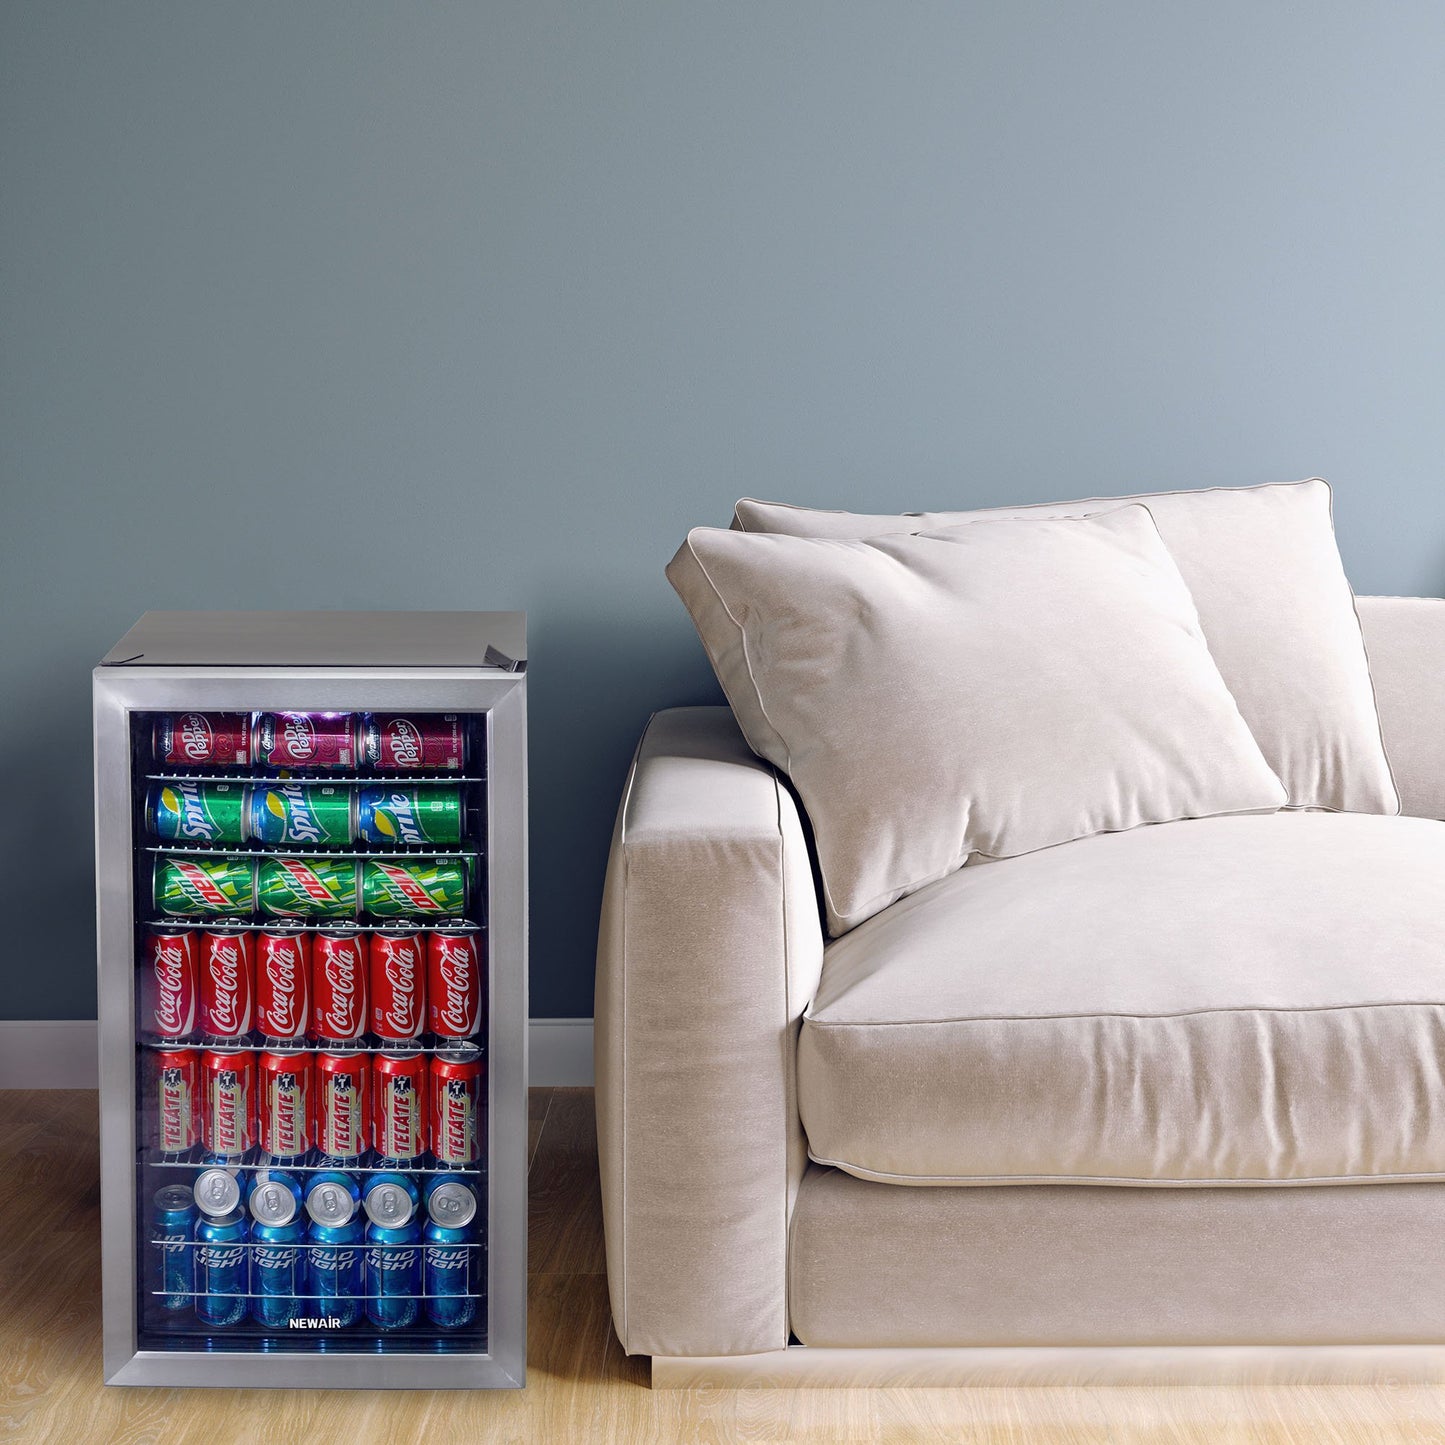 NewAir Beverage Refrigerator Cooler | 126 Cans Free Standing with Right Hinge Glass Door | Mini Fridge Beverage Organizer Perfect For Beer, Wine, Soda, And Cooler Drinks